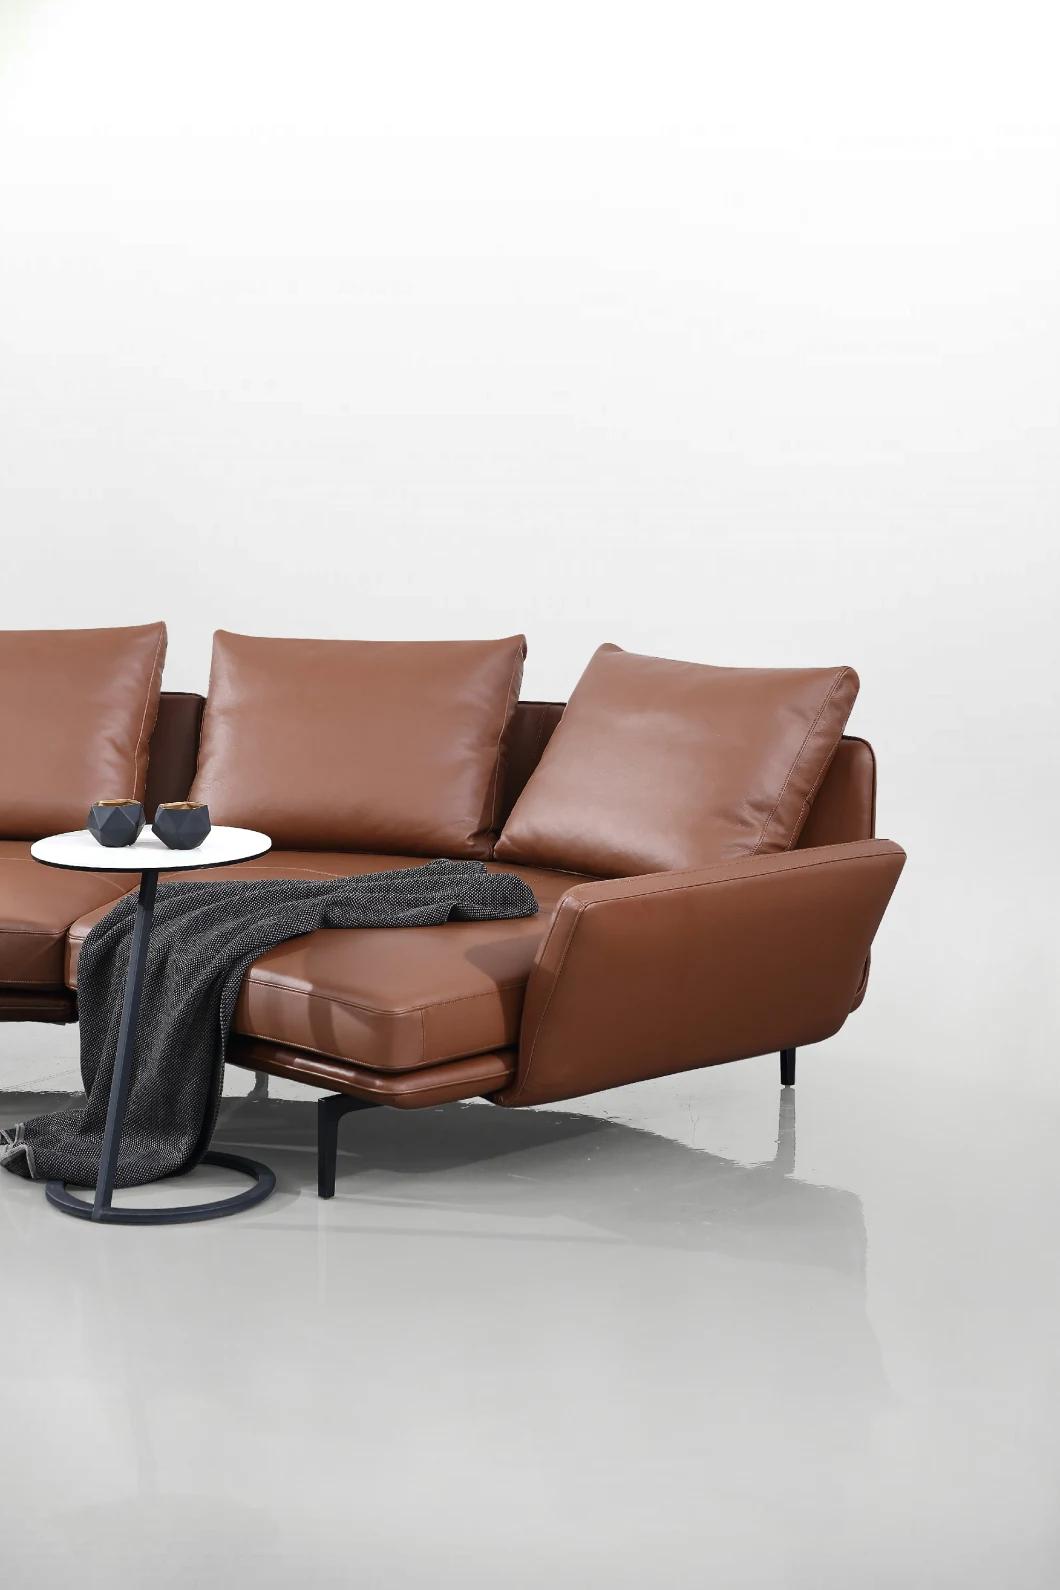 New Modern Home Furniture Multi-Functional Sectional Leather Sofa Set in Living Room Furniture